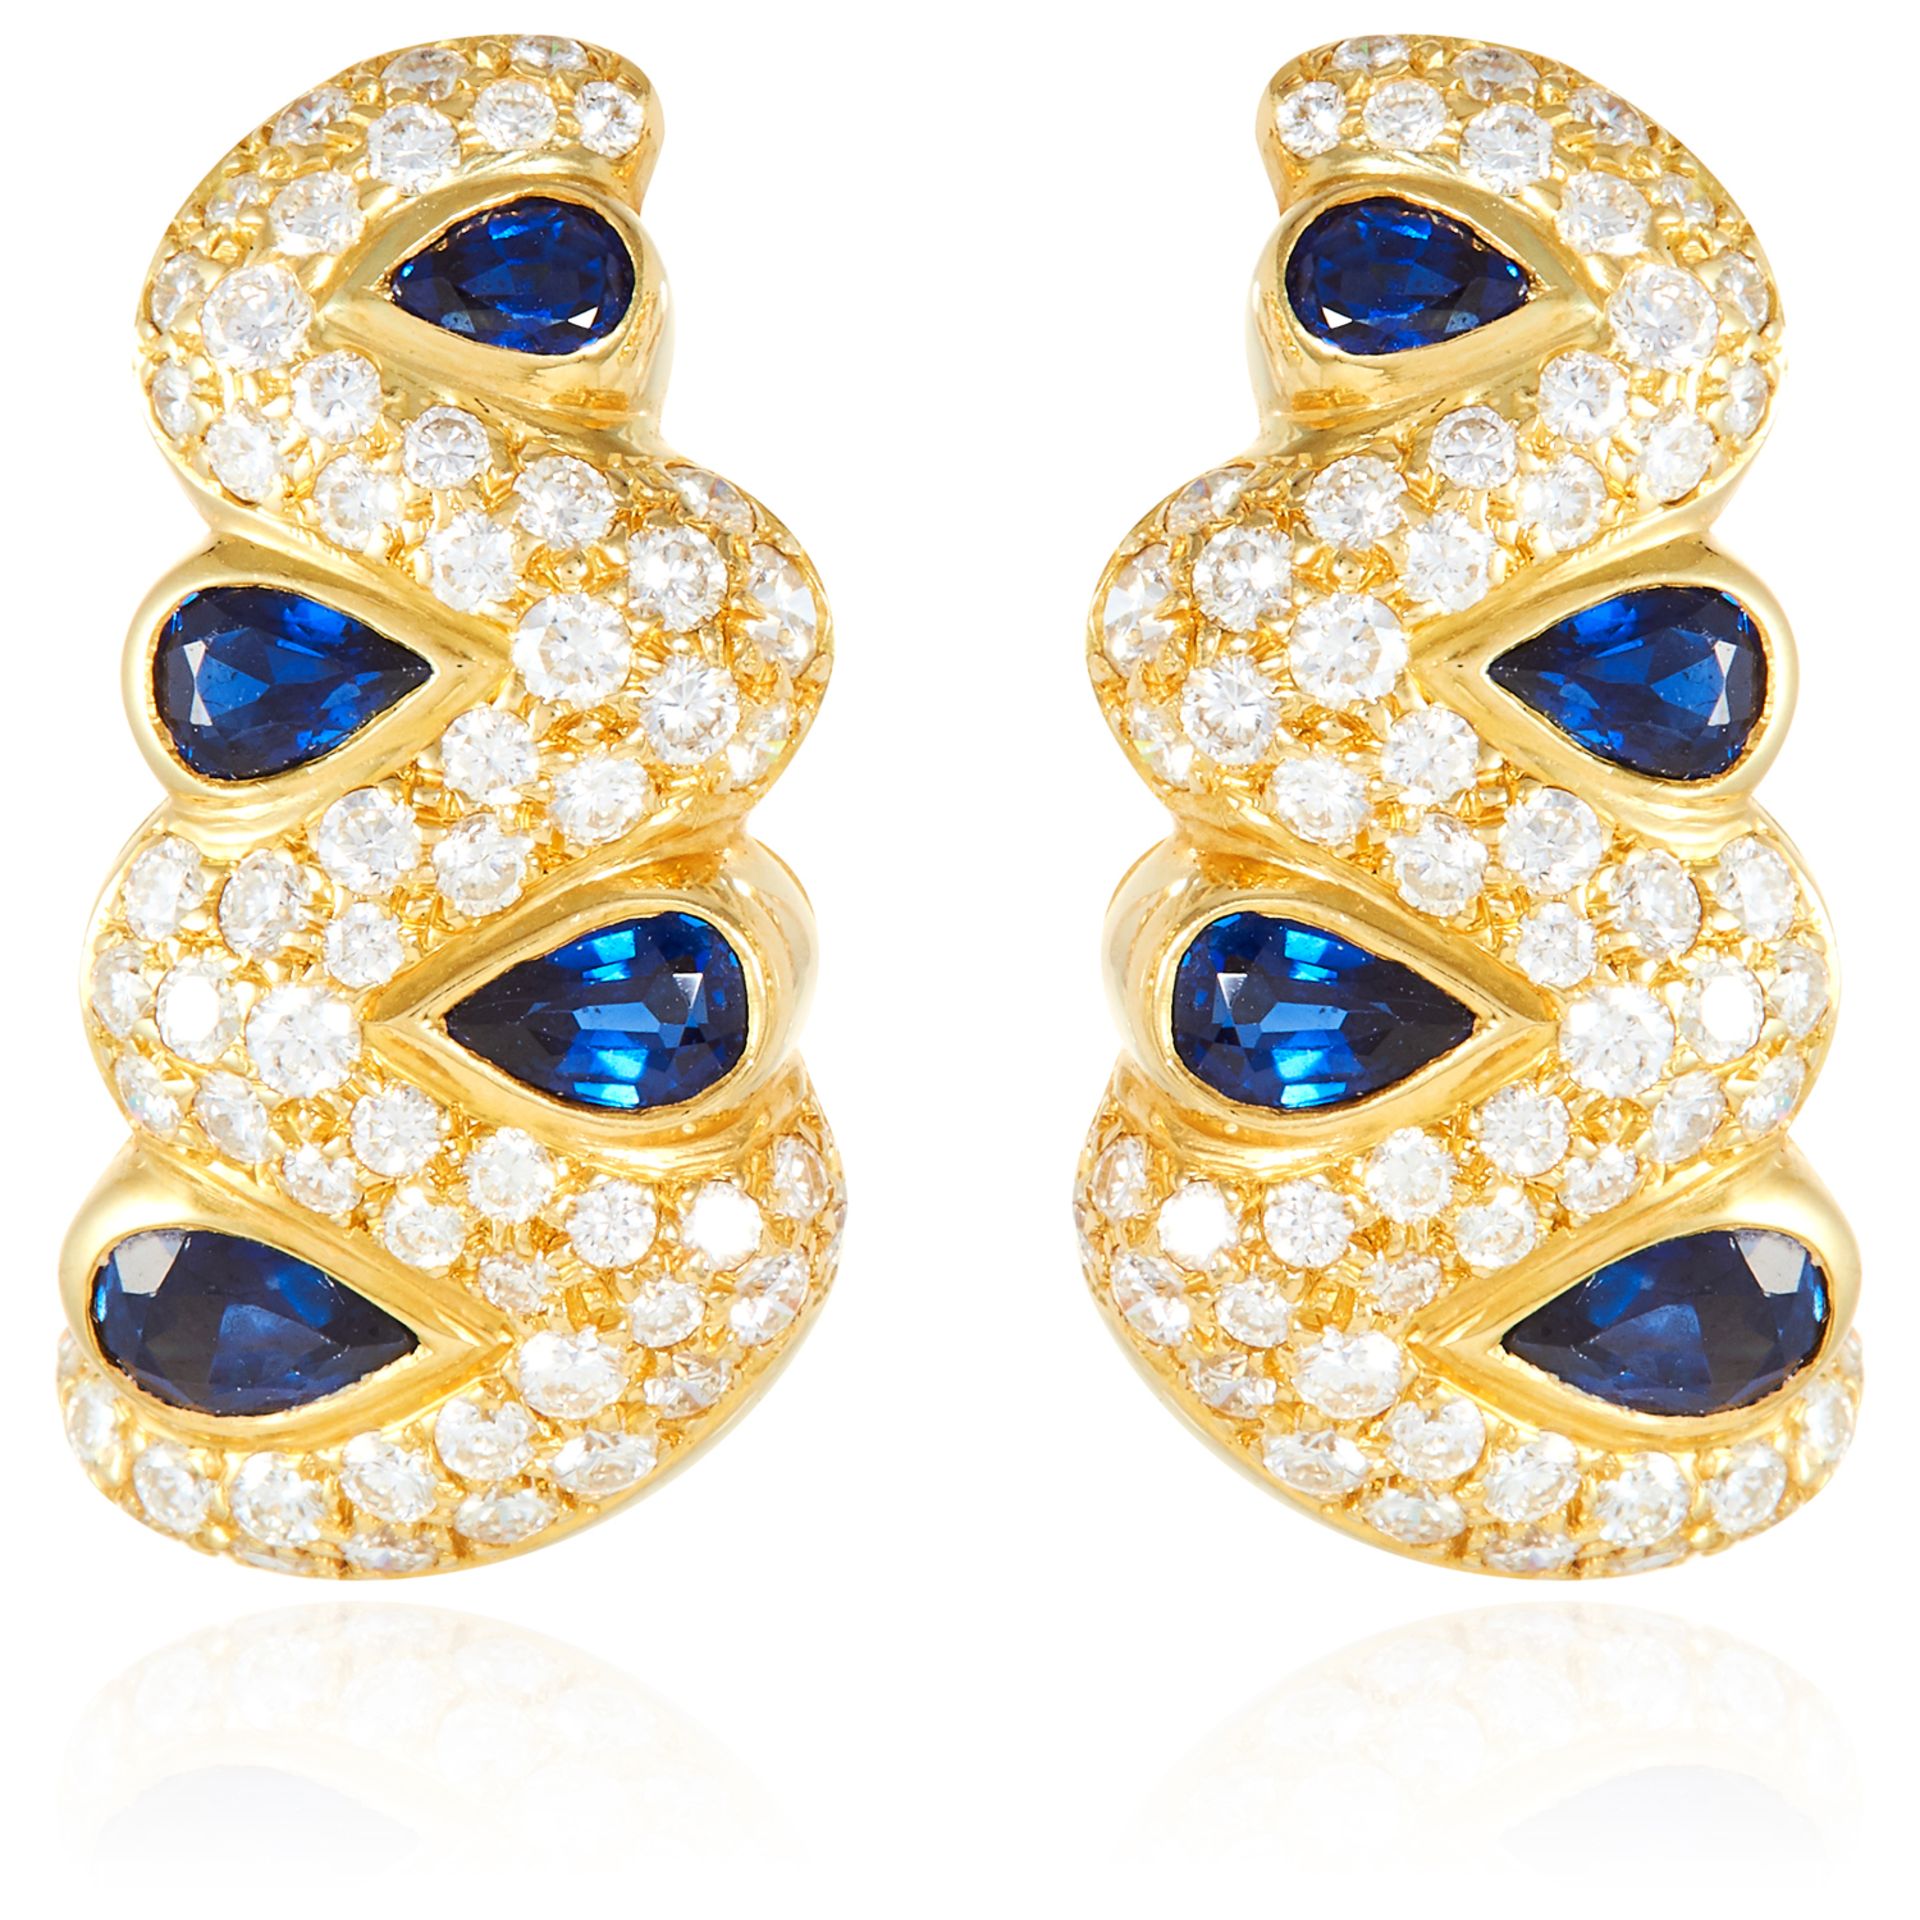 A PAIR OF SAPPHIRE AND DIAMOND EARRINGS in 18ct yellow gold, the tapering bodies jewelled with